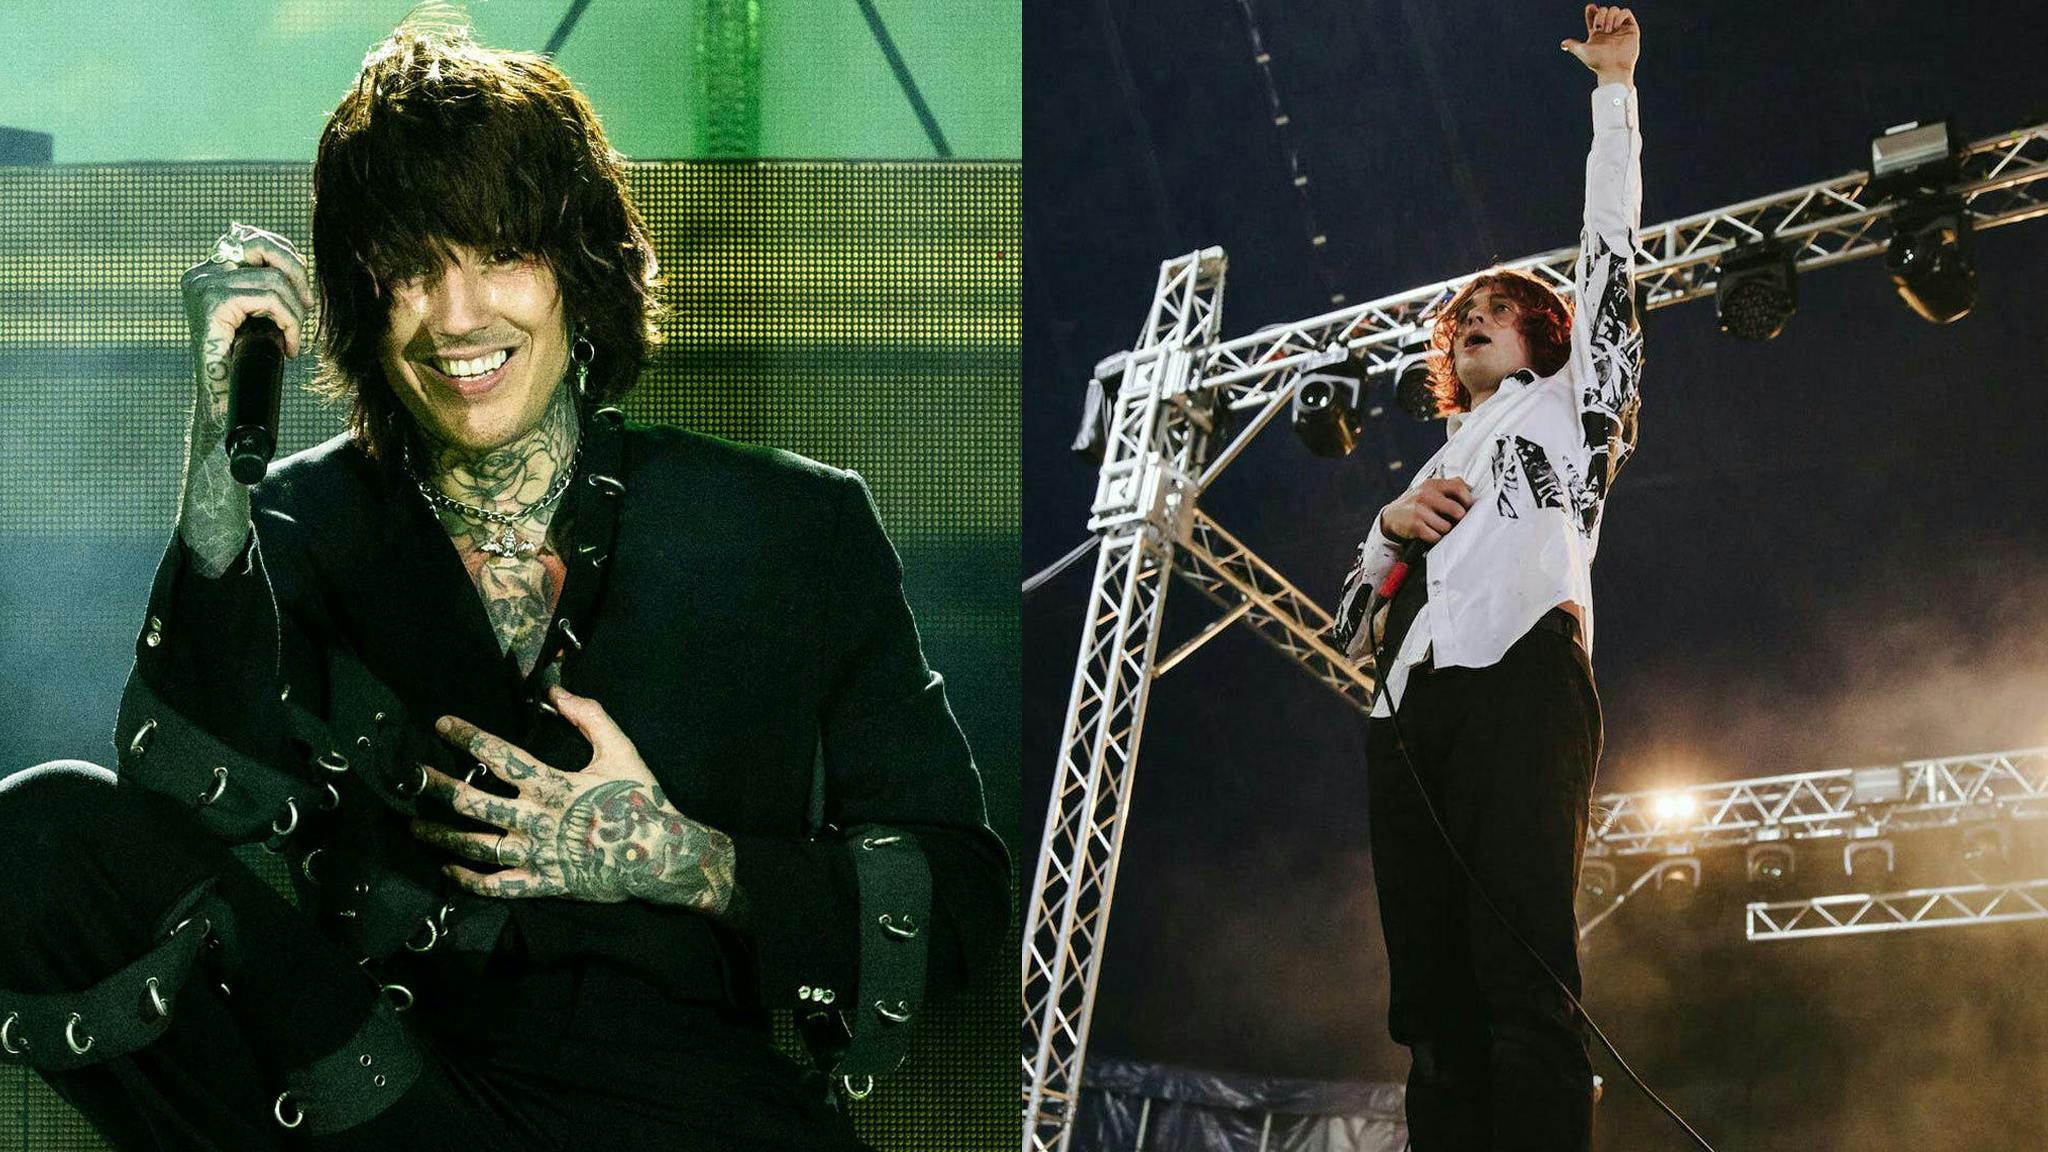 Watch Bring Me The Horizon play Diamonds Aren’t Forever with Olli Appleyard